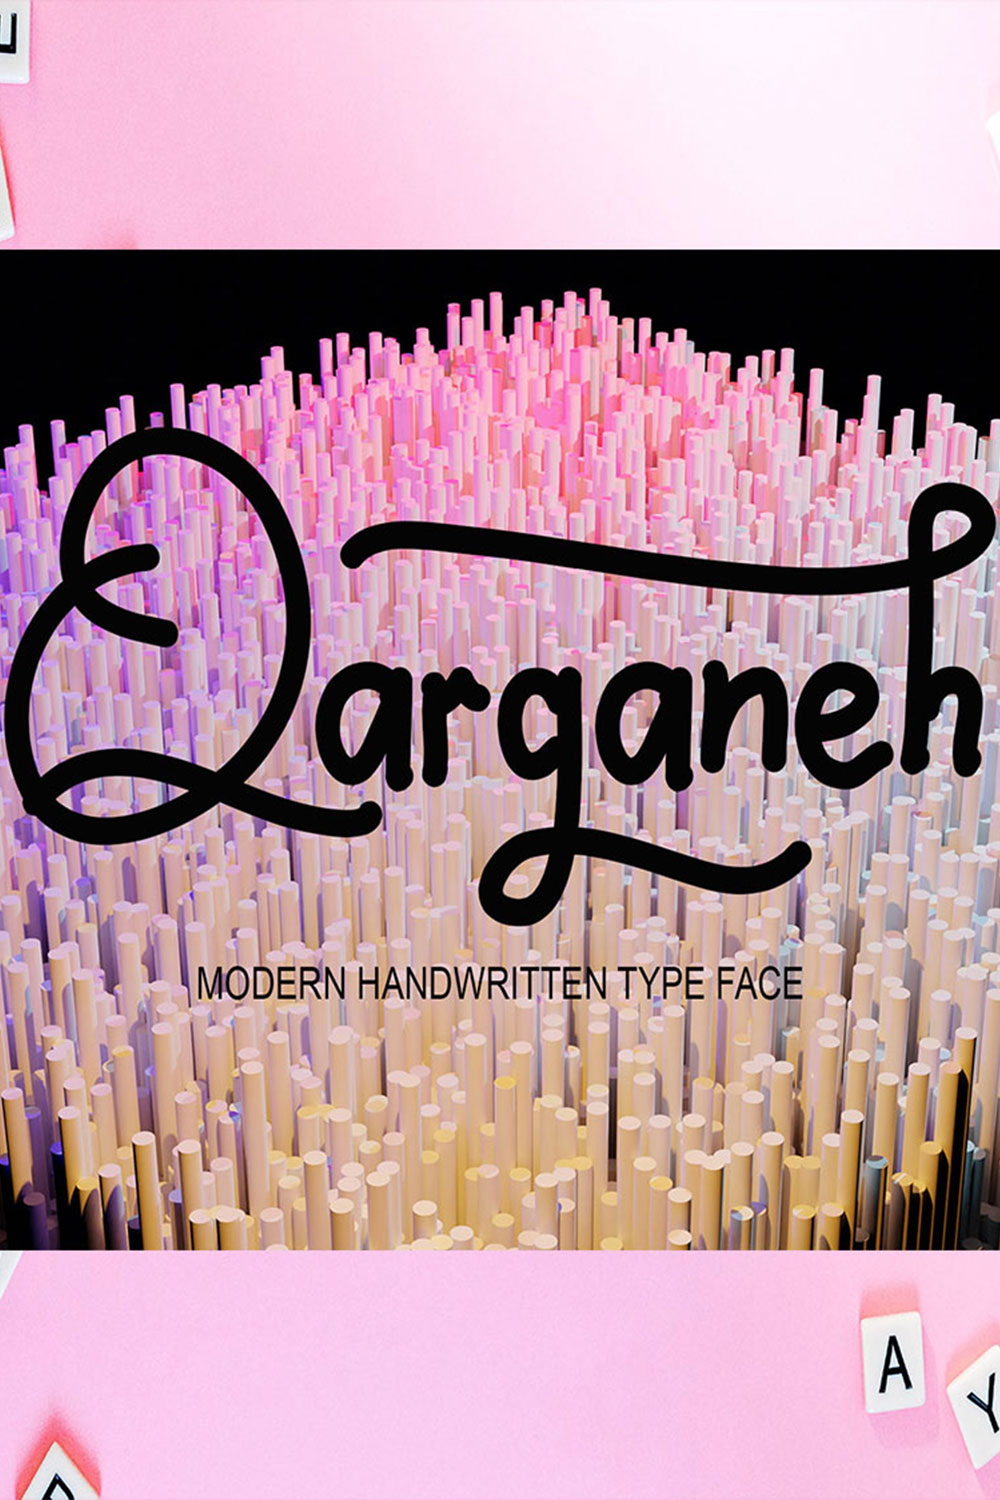 An image with text showing the beautiful Qarganeh font.